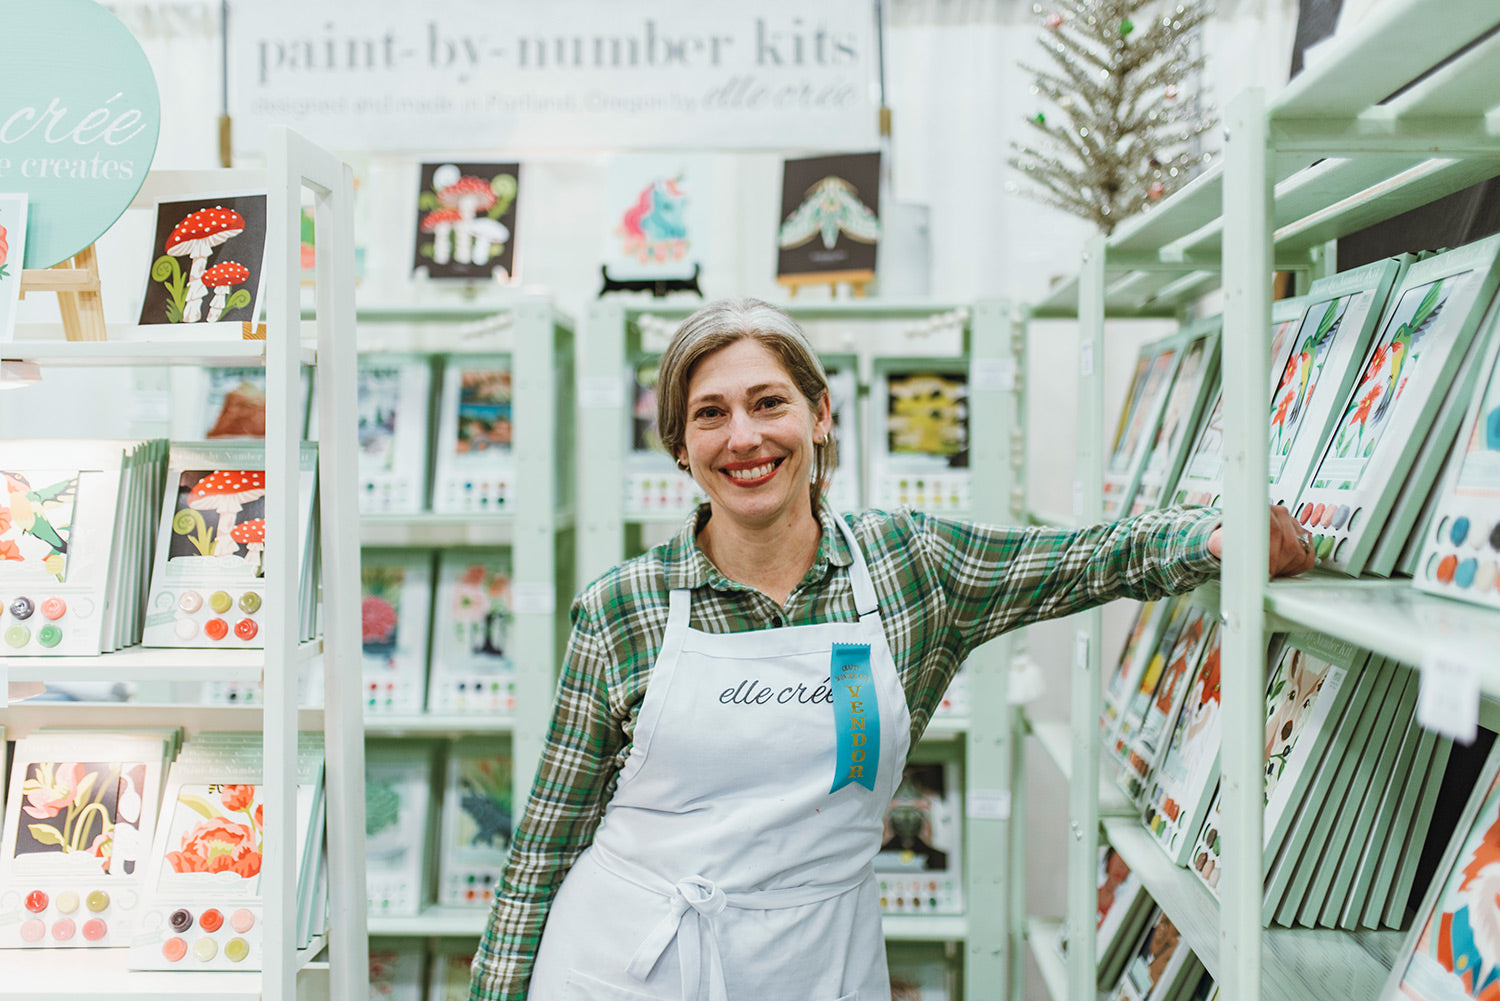 Rachel Austen with her paint by number kits at the Crafty Wonderland winter market in 2022.